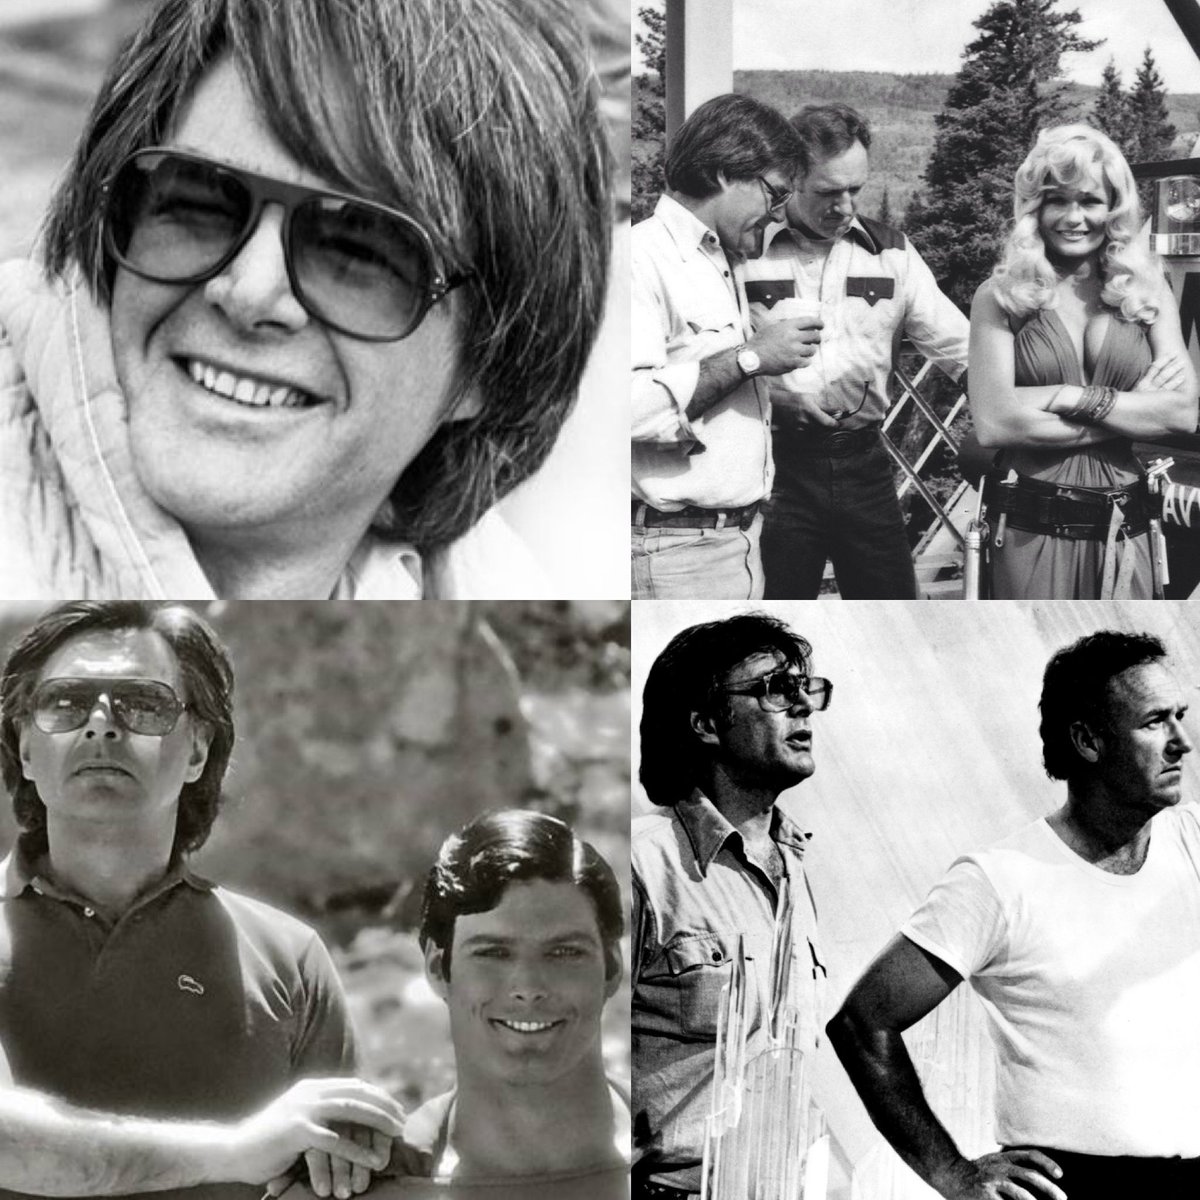 Happy Birthday to the late great Richard Donner! A true legend and visionary!❤️ gofund.me/5bfa4304